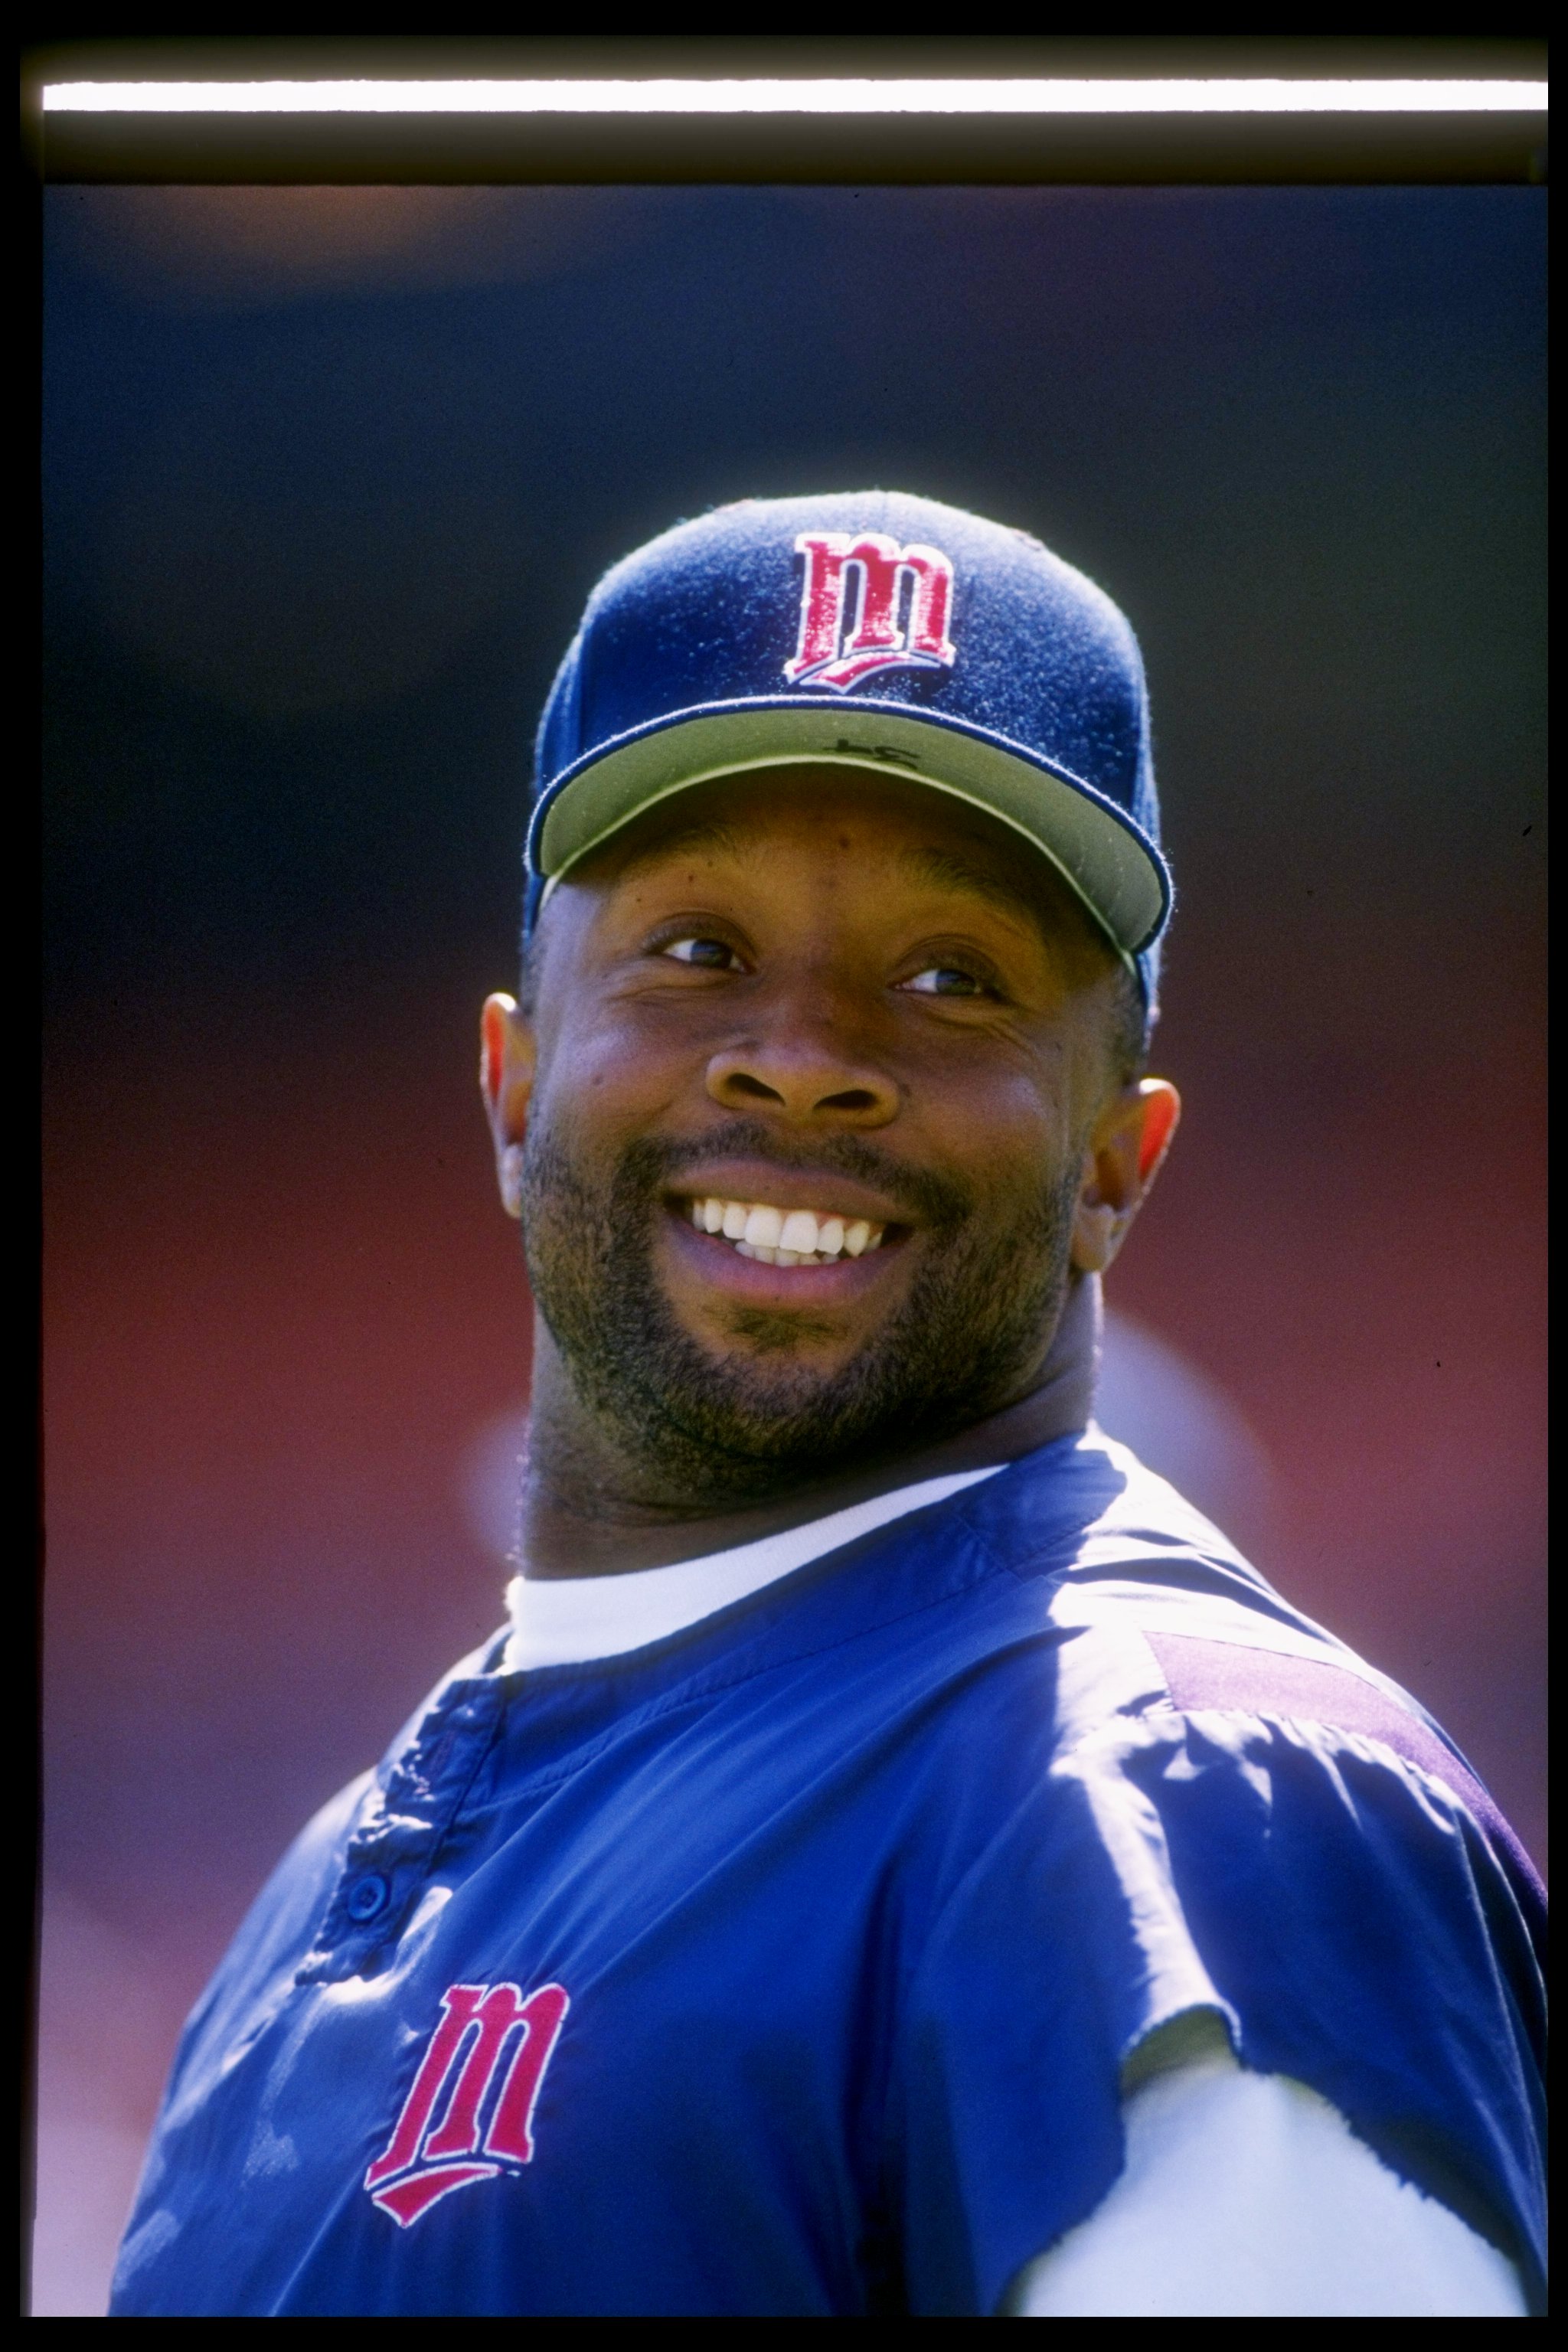 Greatest Show on Dirt on X: Classic Kirby Puckett in one of the